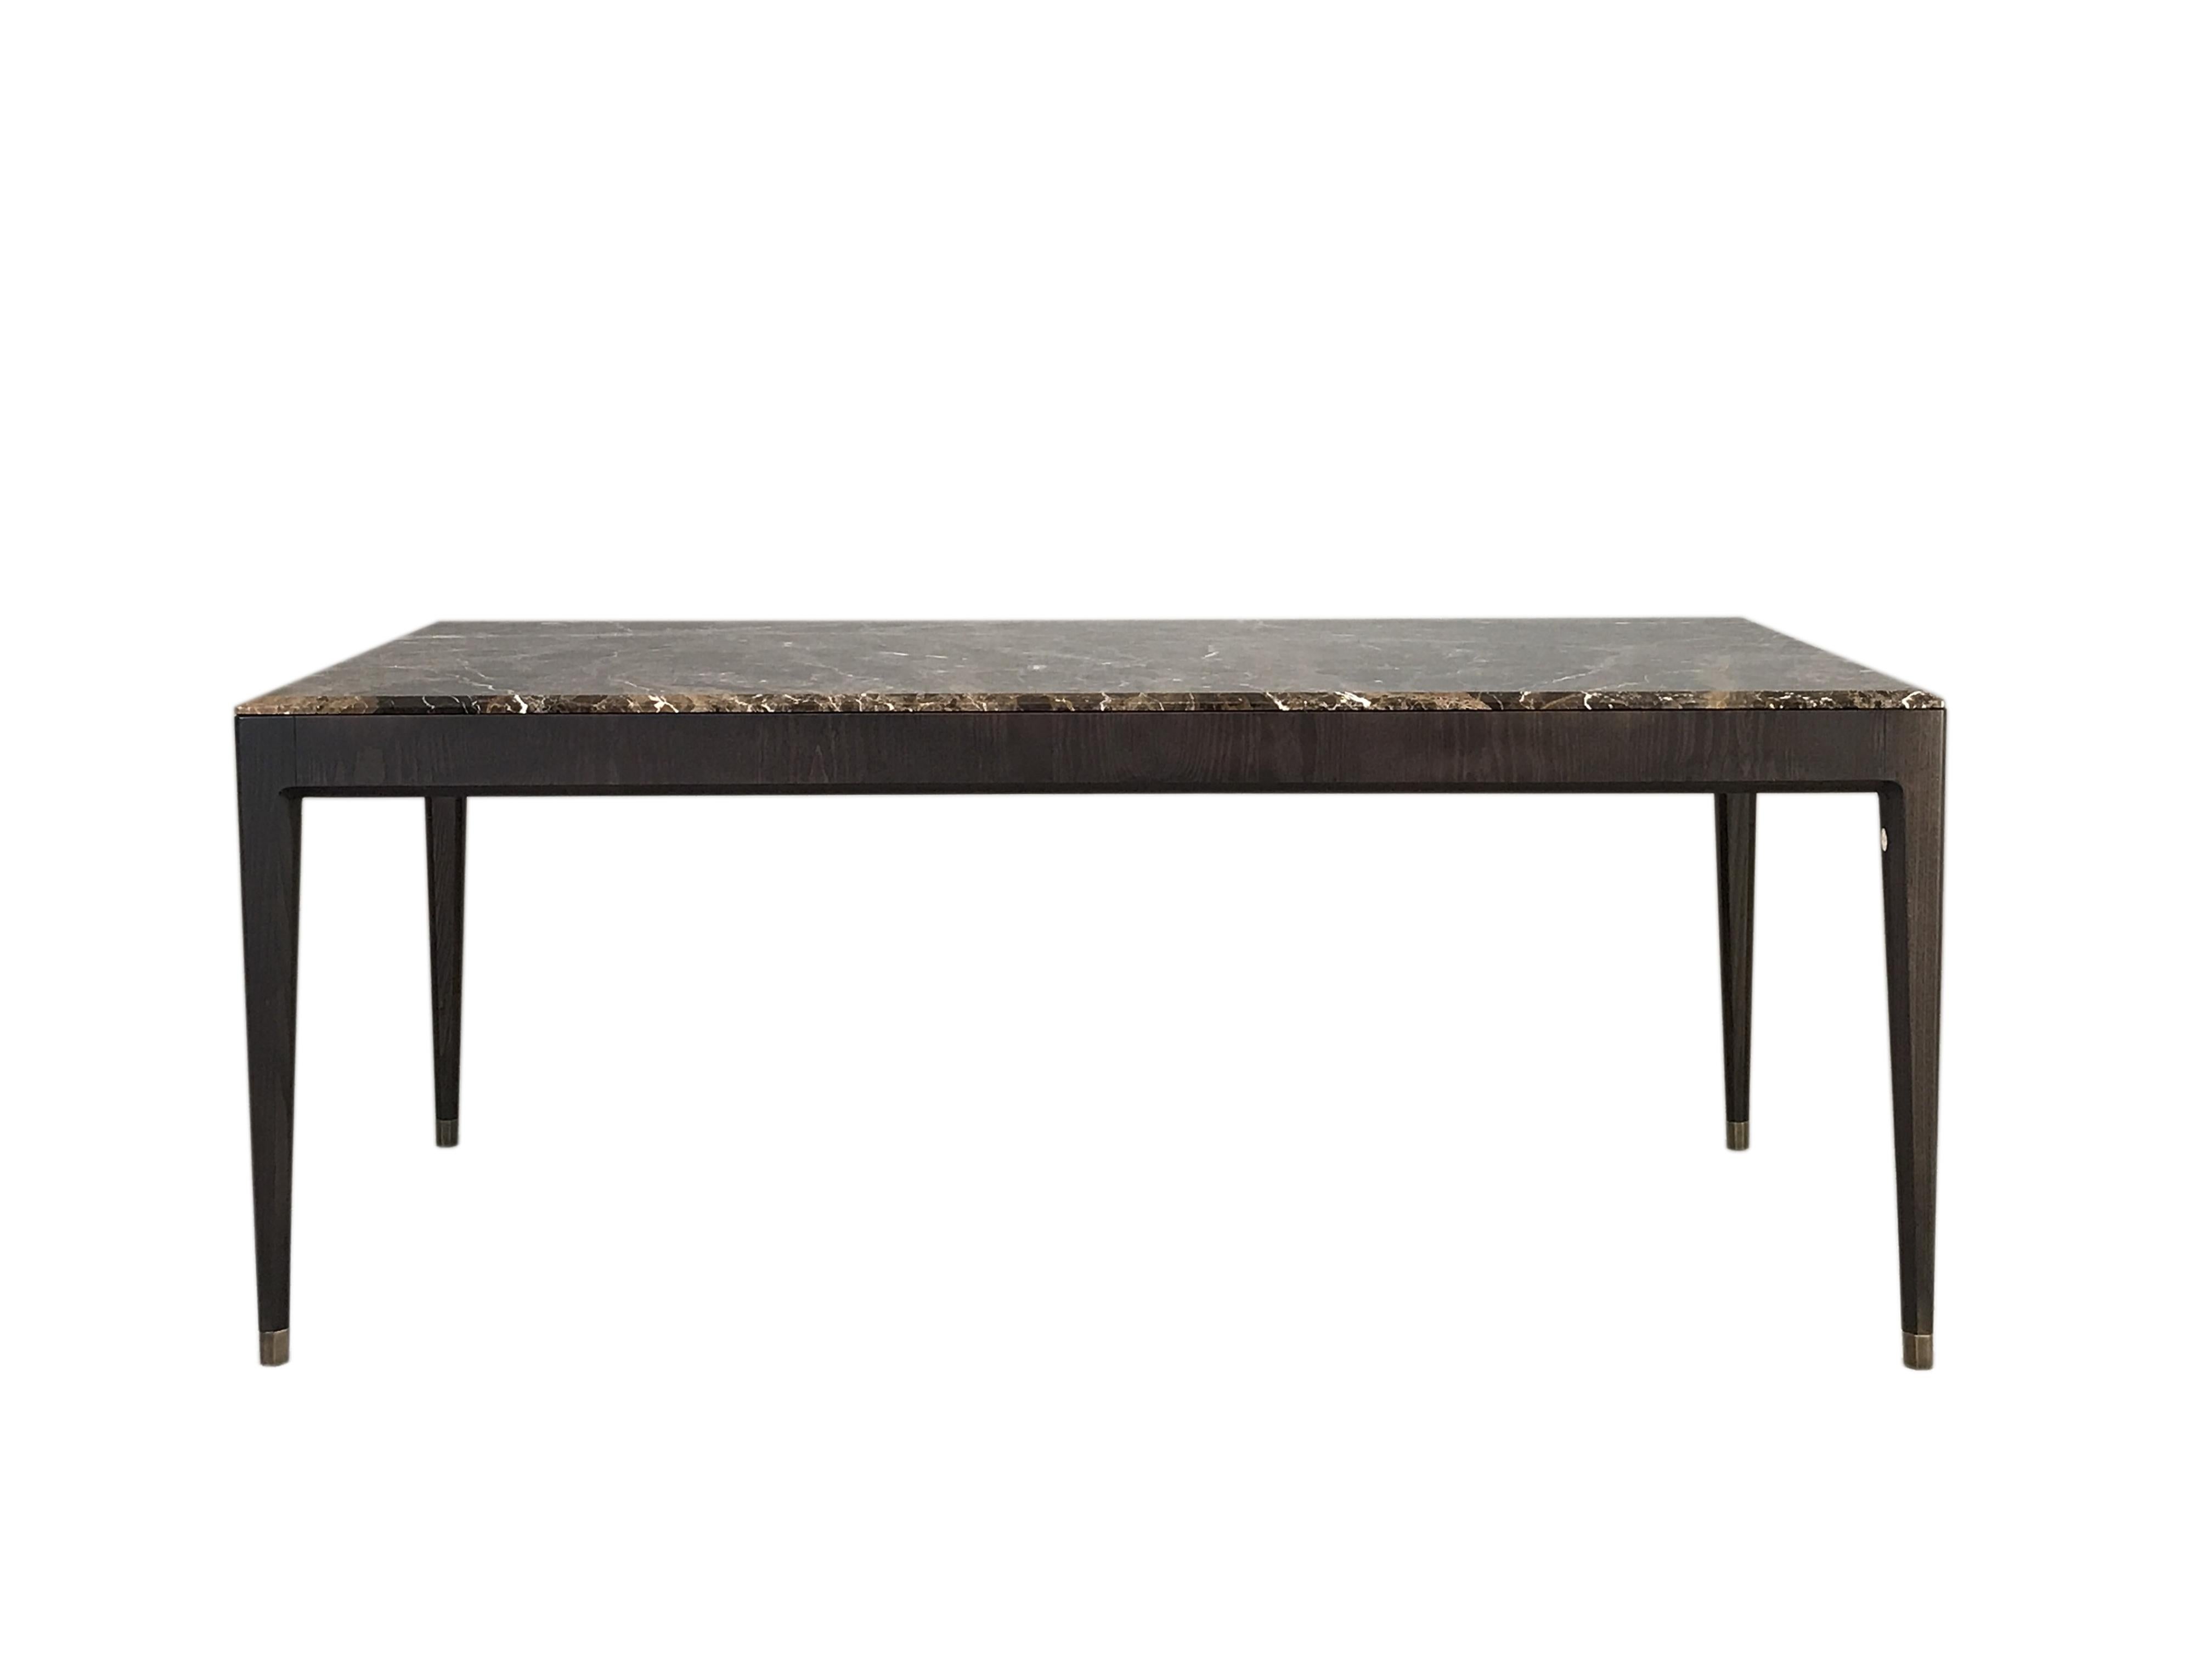 Italian Italo Contemporary Dining Table in Ashwood and Marble Top